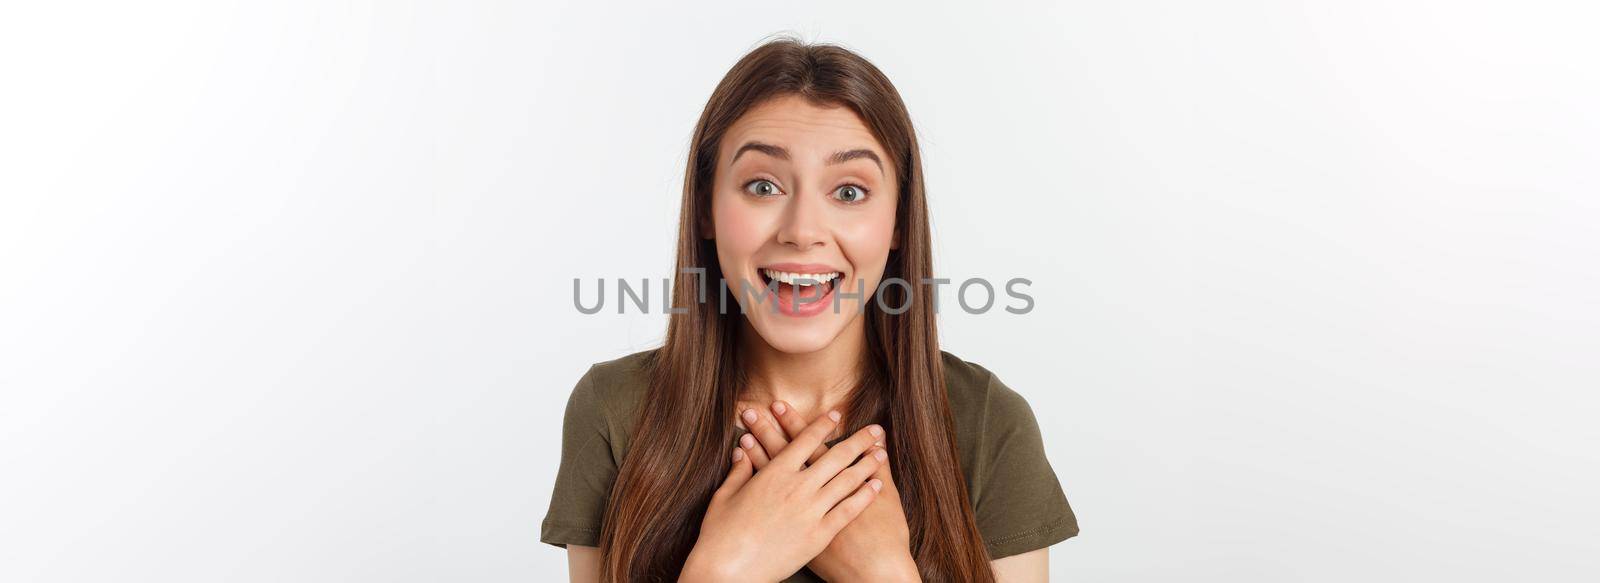 Portrait joyful outgoing woman likes laugh out loud not hiding emotions giggling chuckling facepalm close eyes smiling broadly white background.